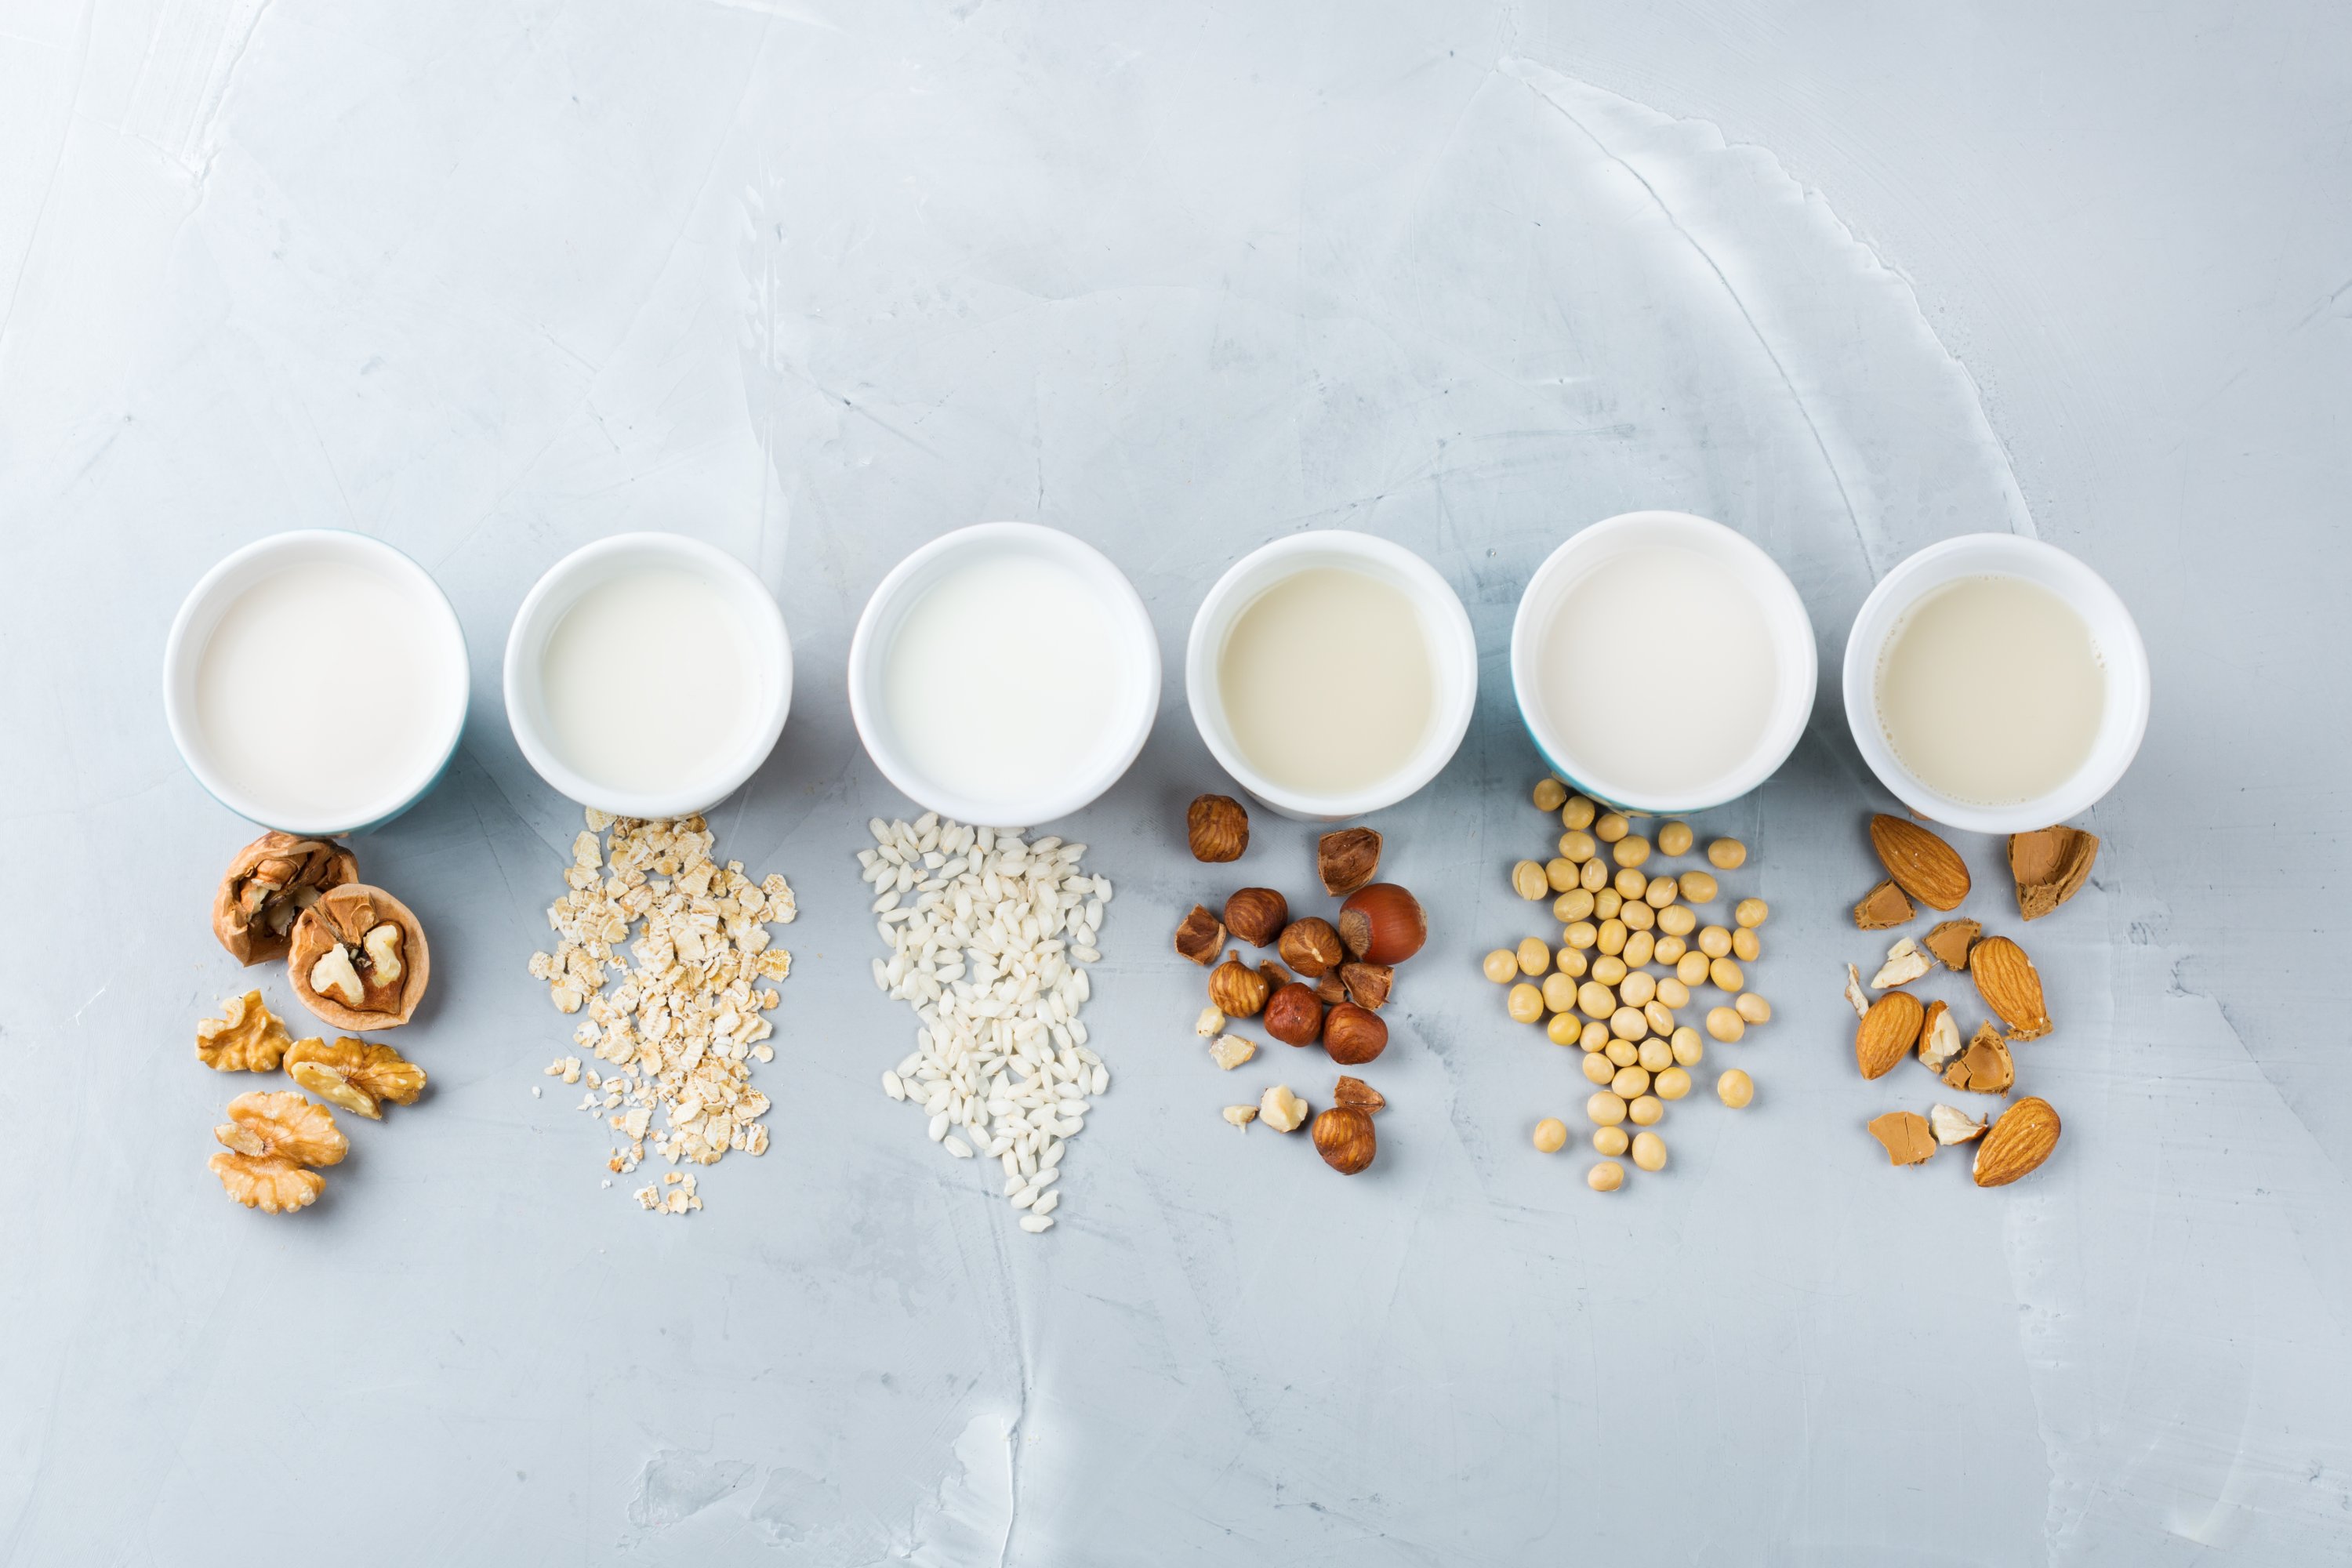 Oat, almond or soy: How to choose a plant-based milk | Daily Sabah